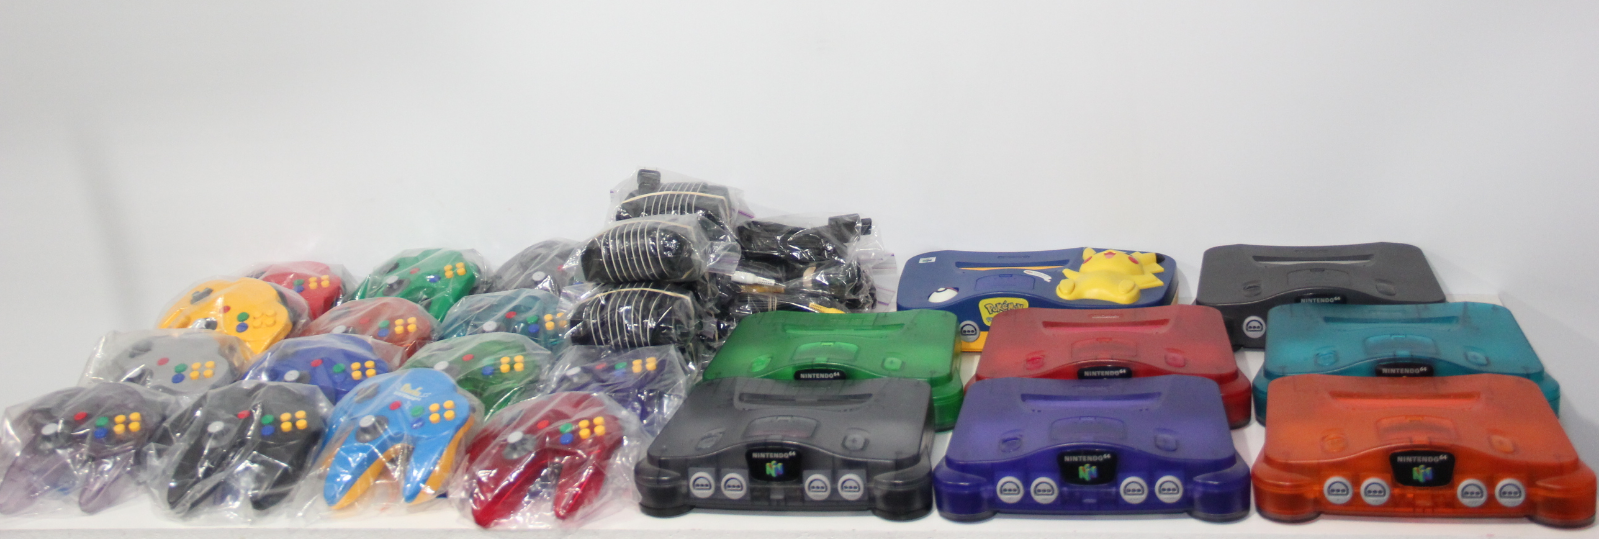 Nintendo 64, N64 Complete Console & Controller Collection